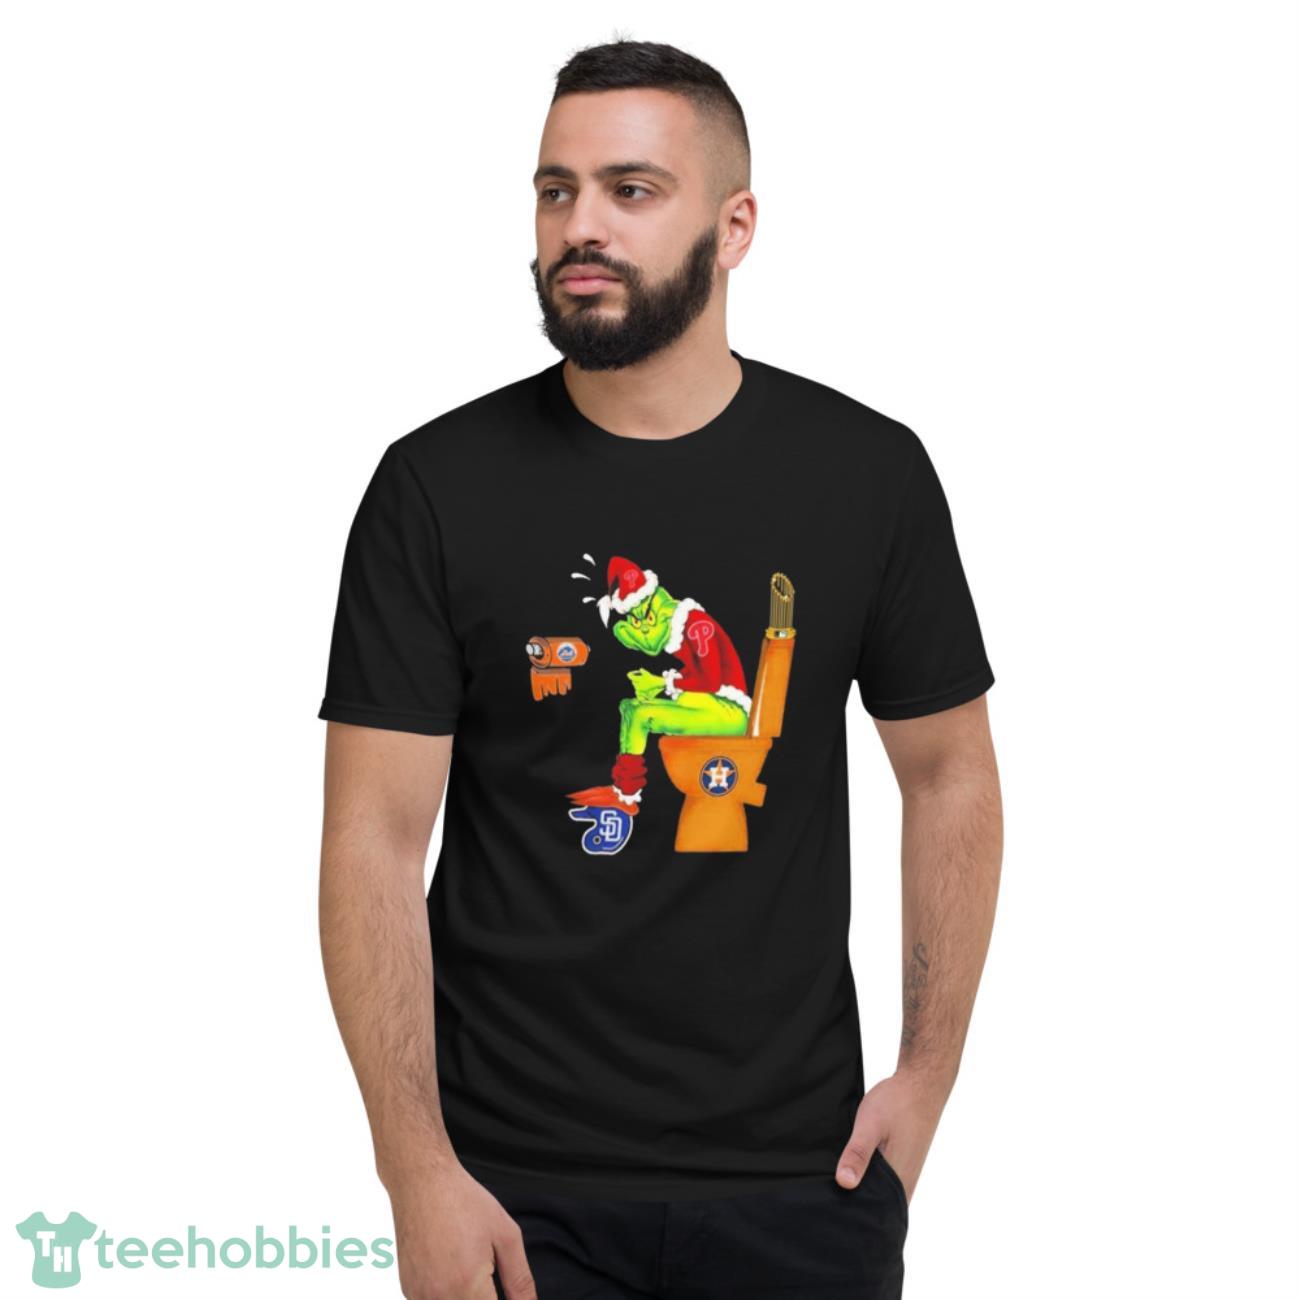 Grinch Philadelphia Phillies Shitting On Toilet Houston Astros And Other Teams 2023 Shirt - Short Sleeve T-Shirt